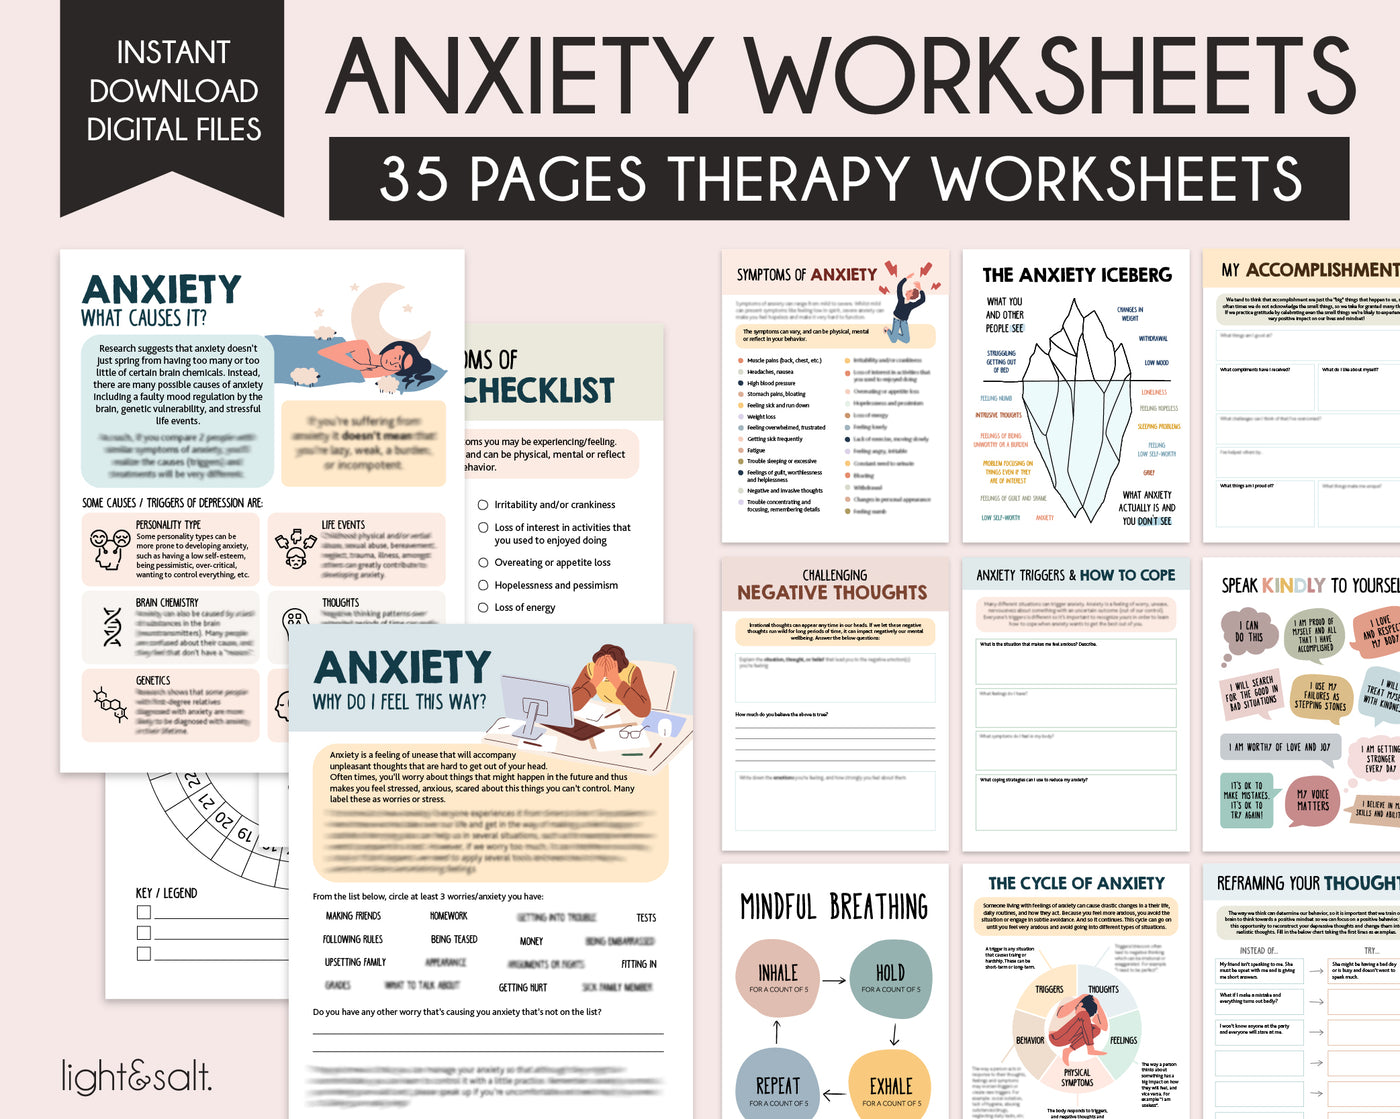 Anxiety worksheets